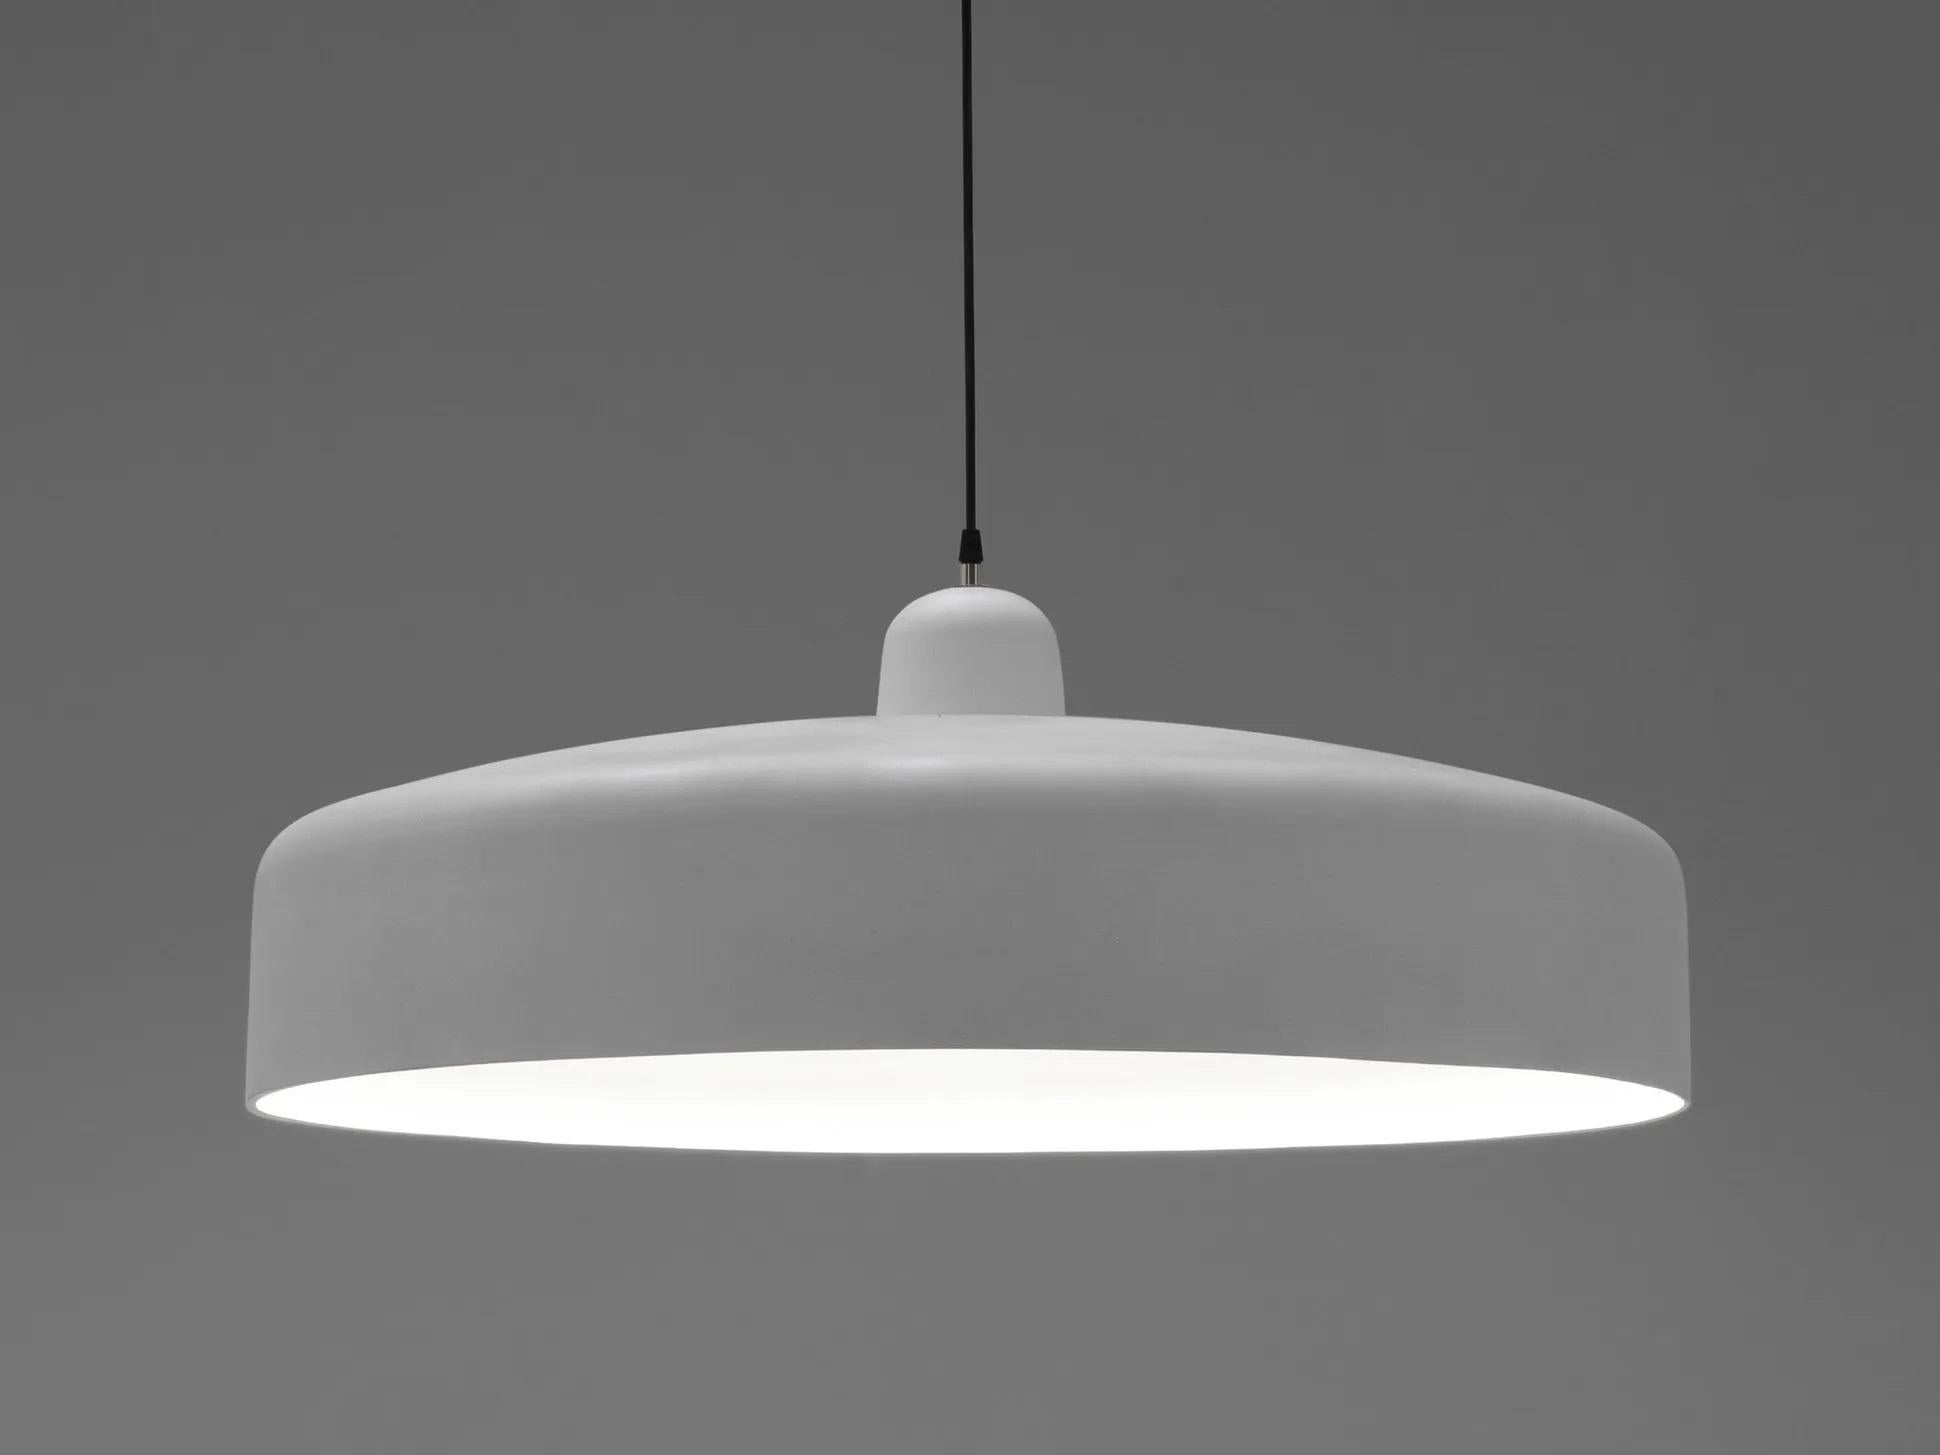 Lei pendant lamp by Imperfettolab
2017
Designer : Verter Turroni
Dimensions: Ø 85 X 35 cm
Materials: Fibreglass

The apparent simplicity of this lamp conceals a careful study of lines and proportions. Its presence, suspended in the space of a